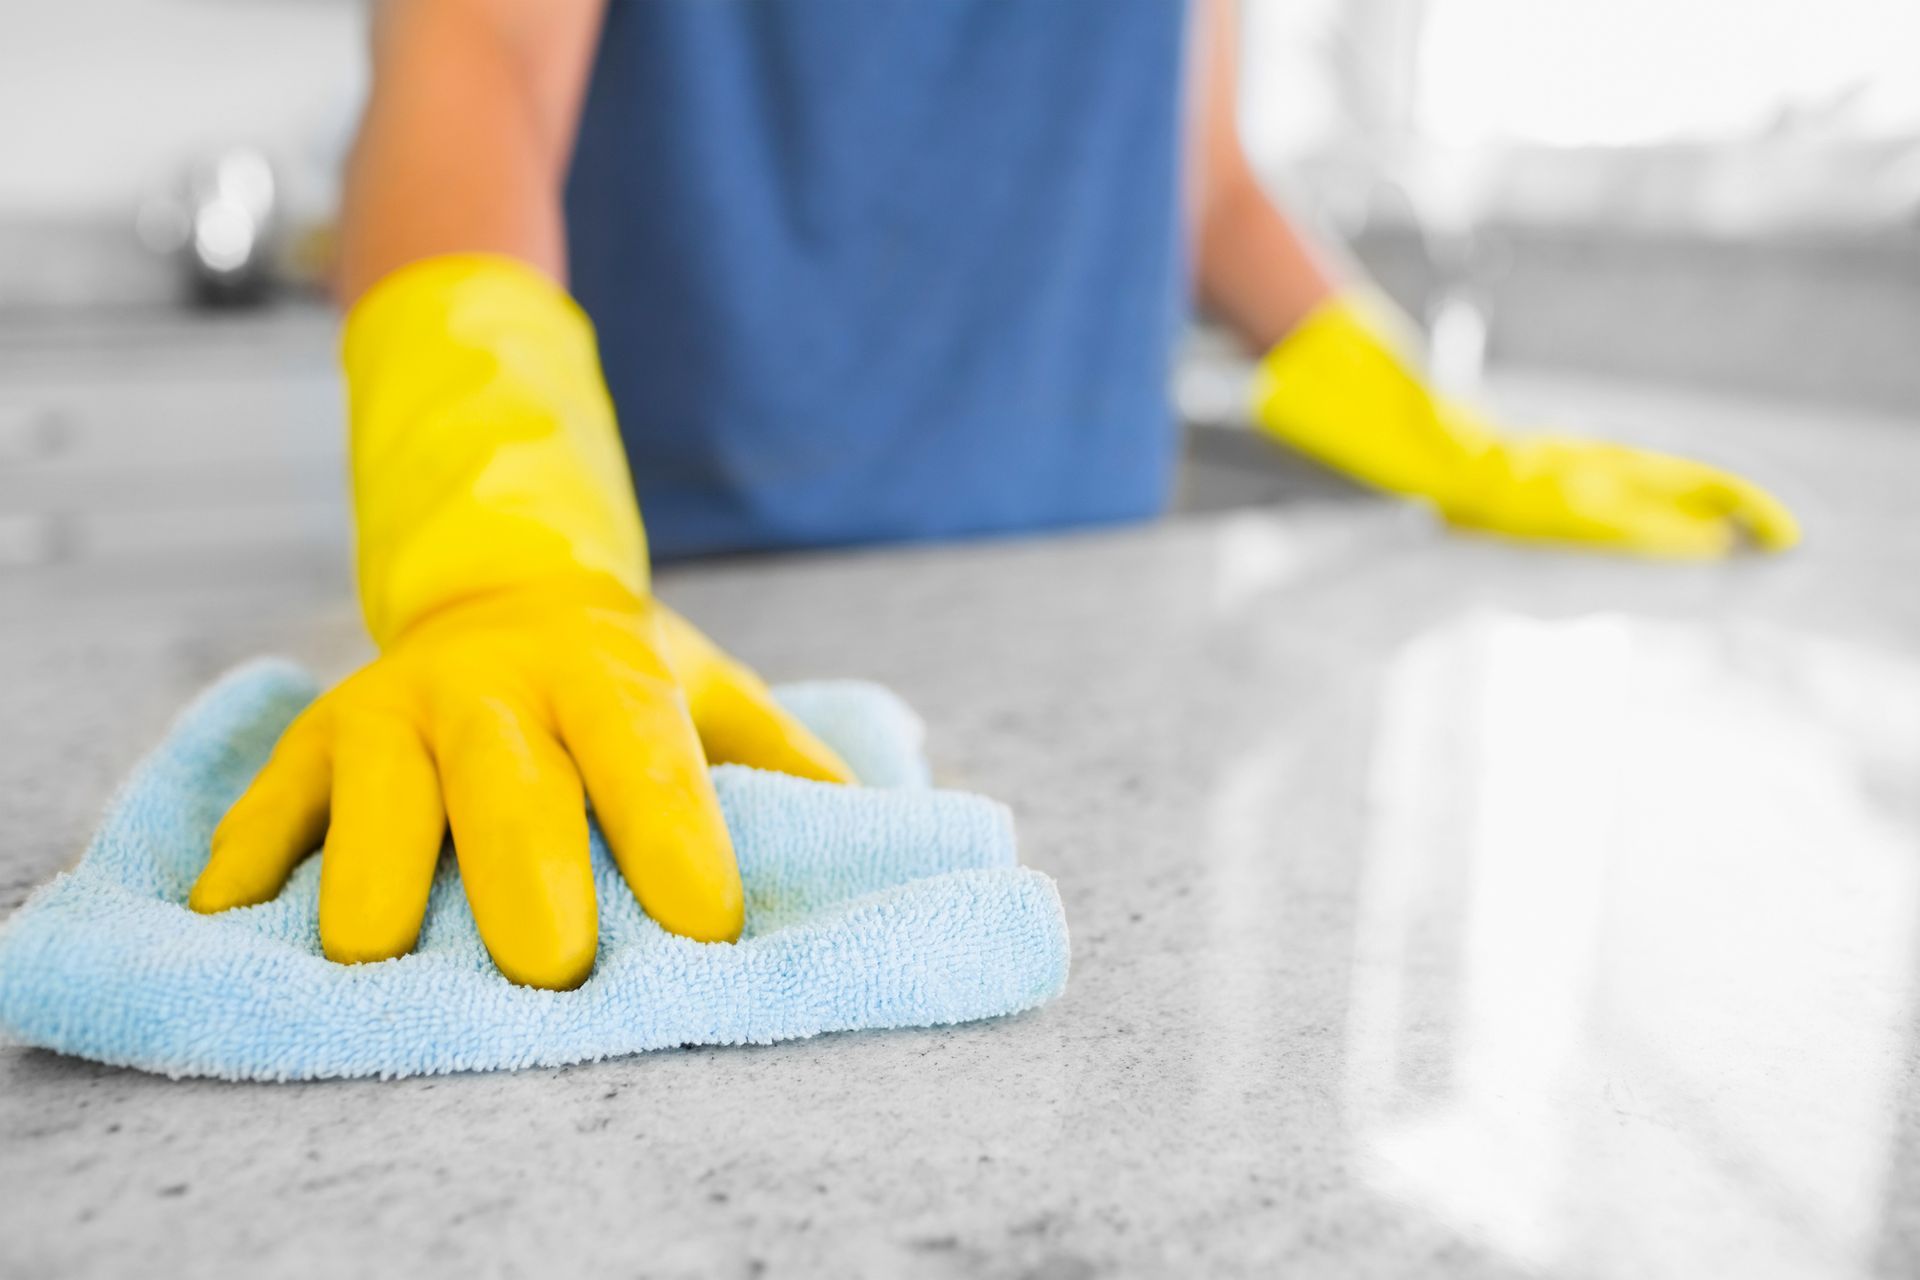 a person wearing yellow gloves is cleaning a counter with a blue cloth